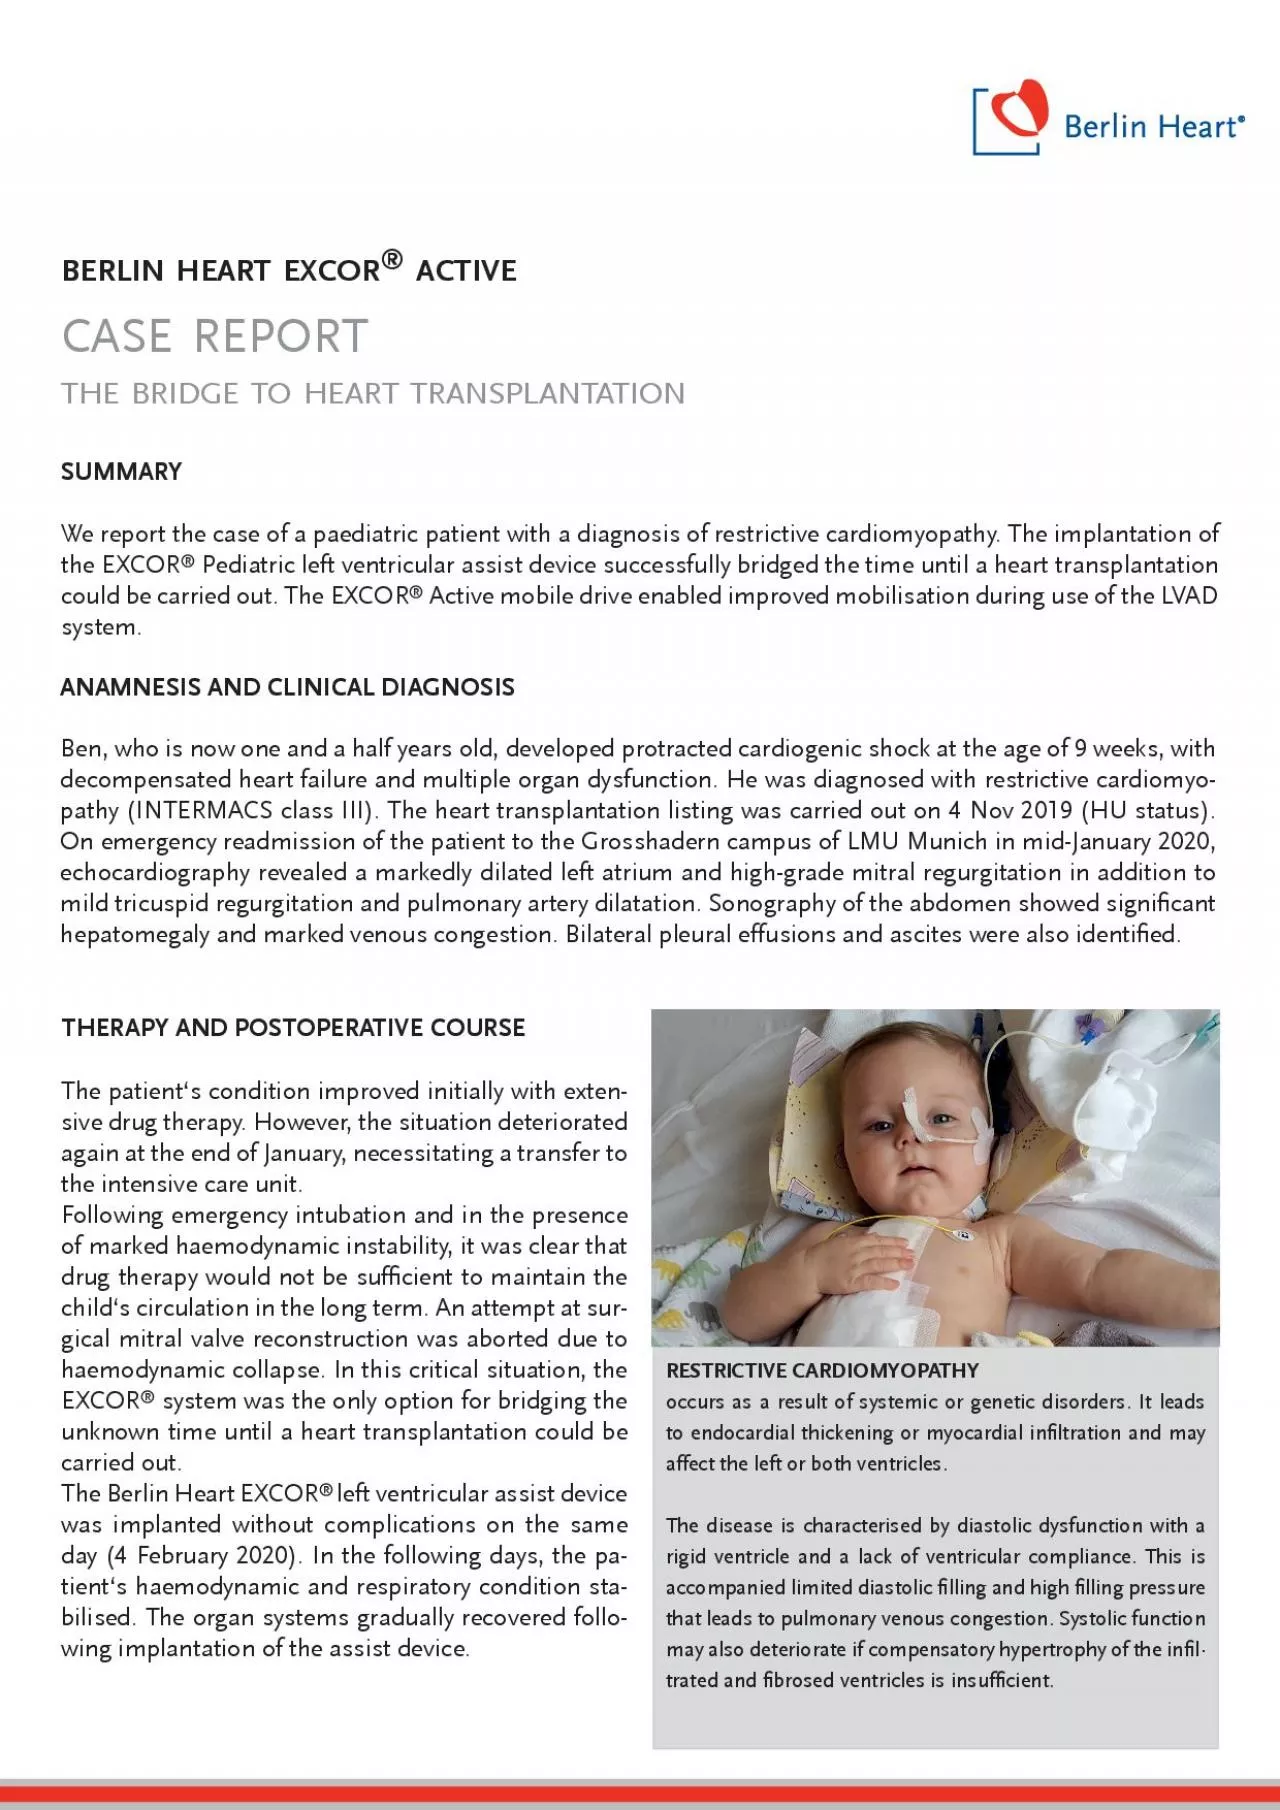 We report the case of a paediatric patient with a diagnosis of restric